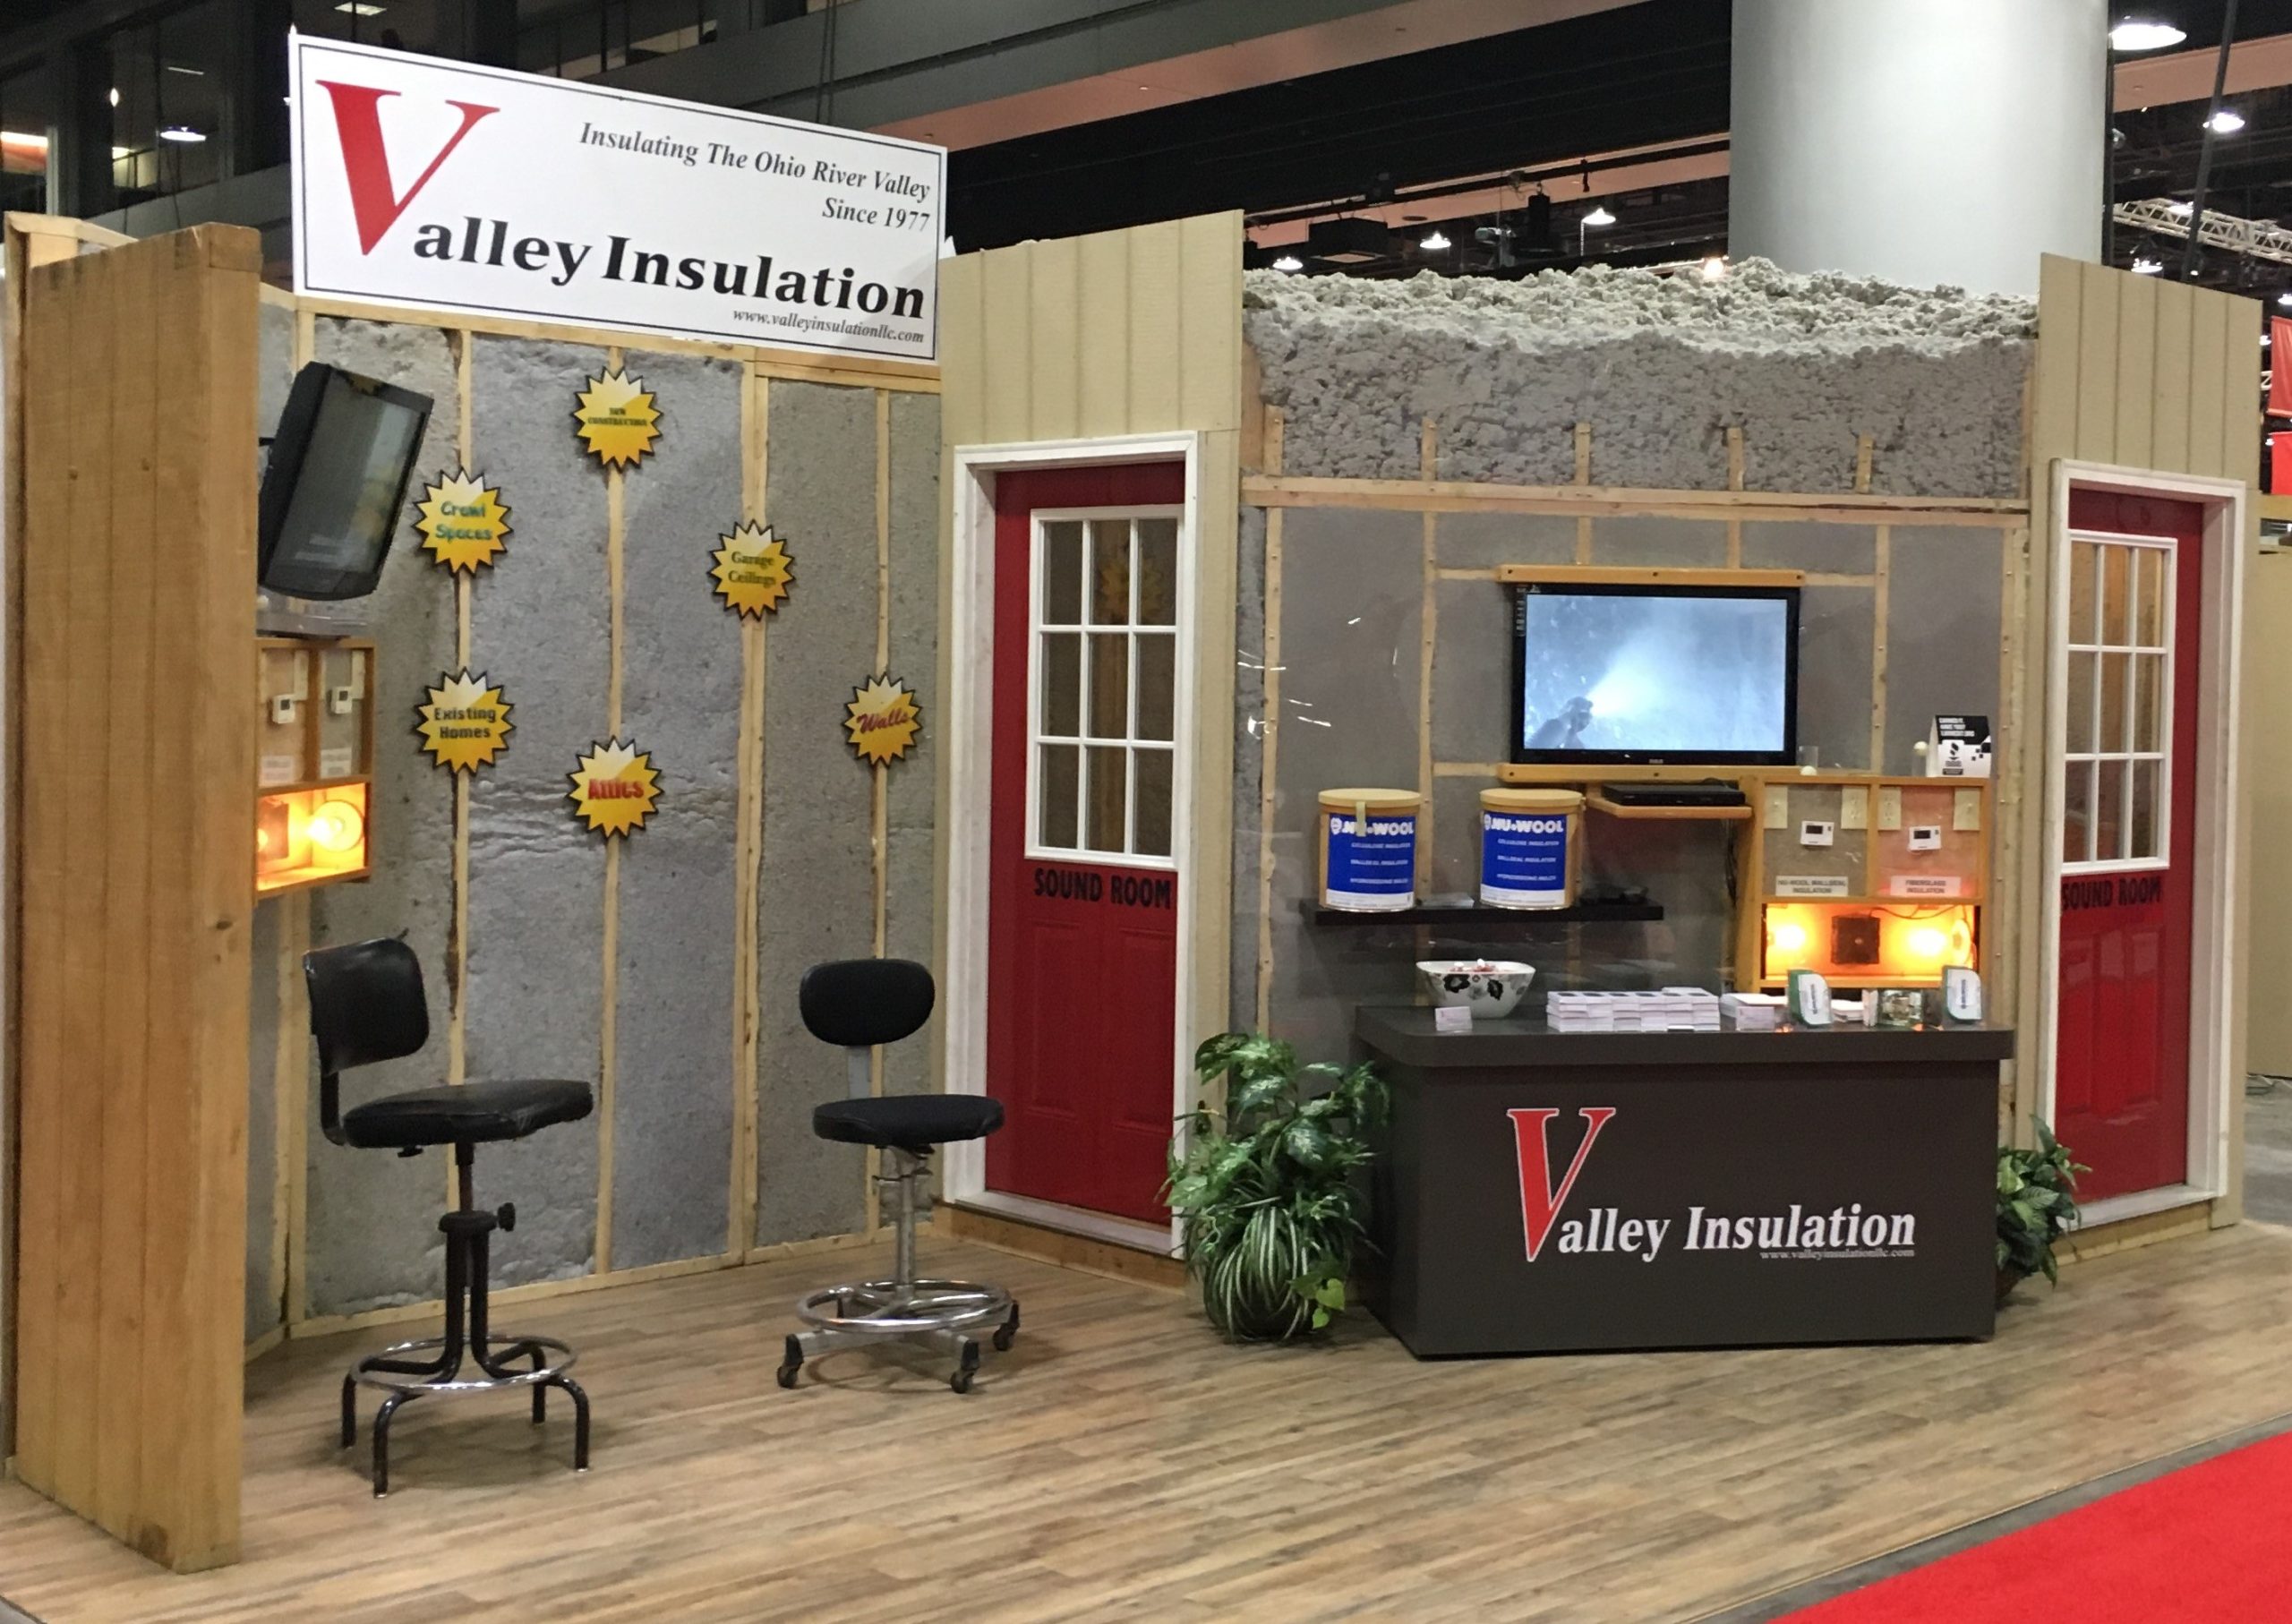 Valley Insulation display at an industry event 3